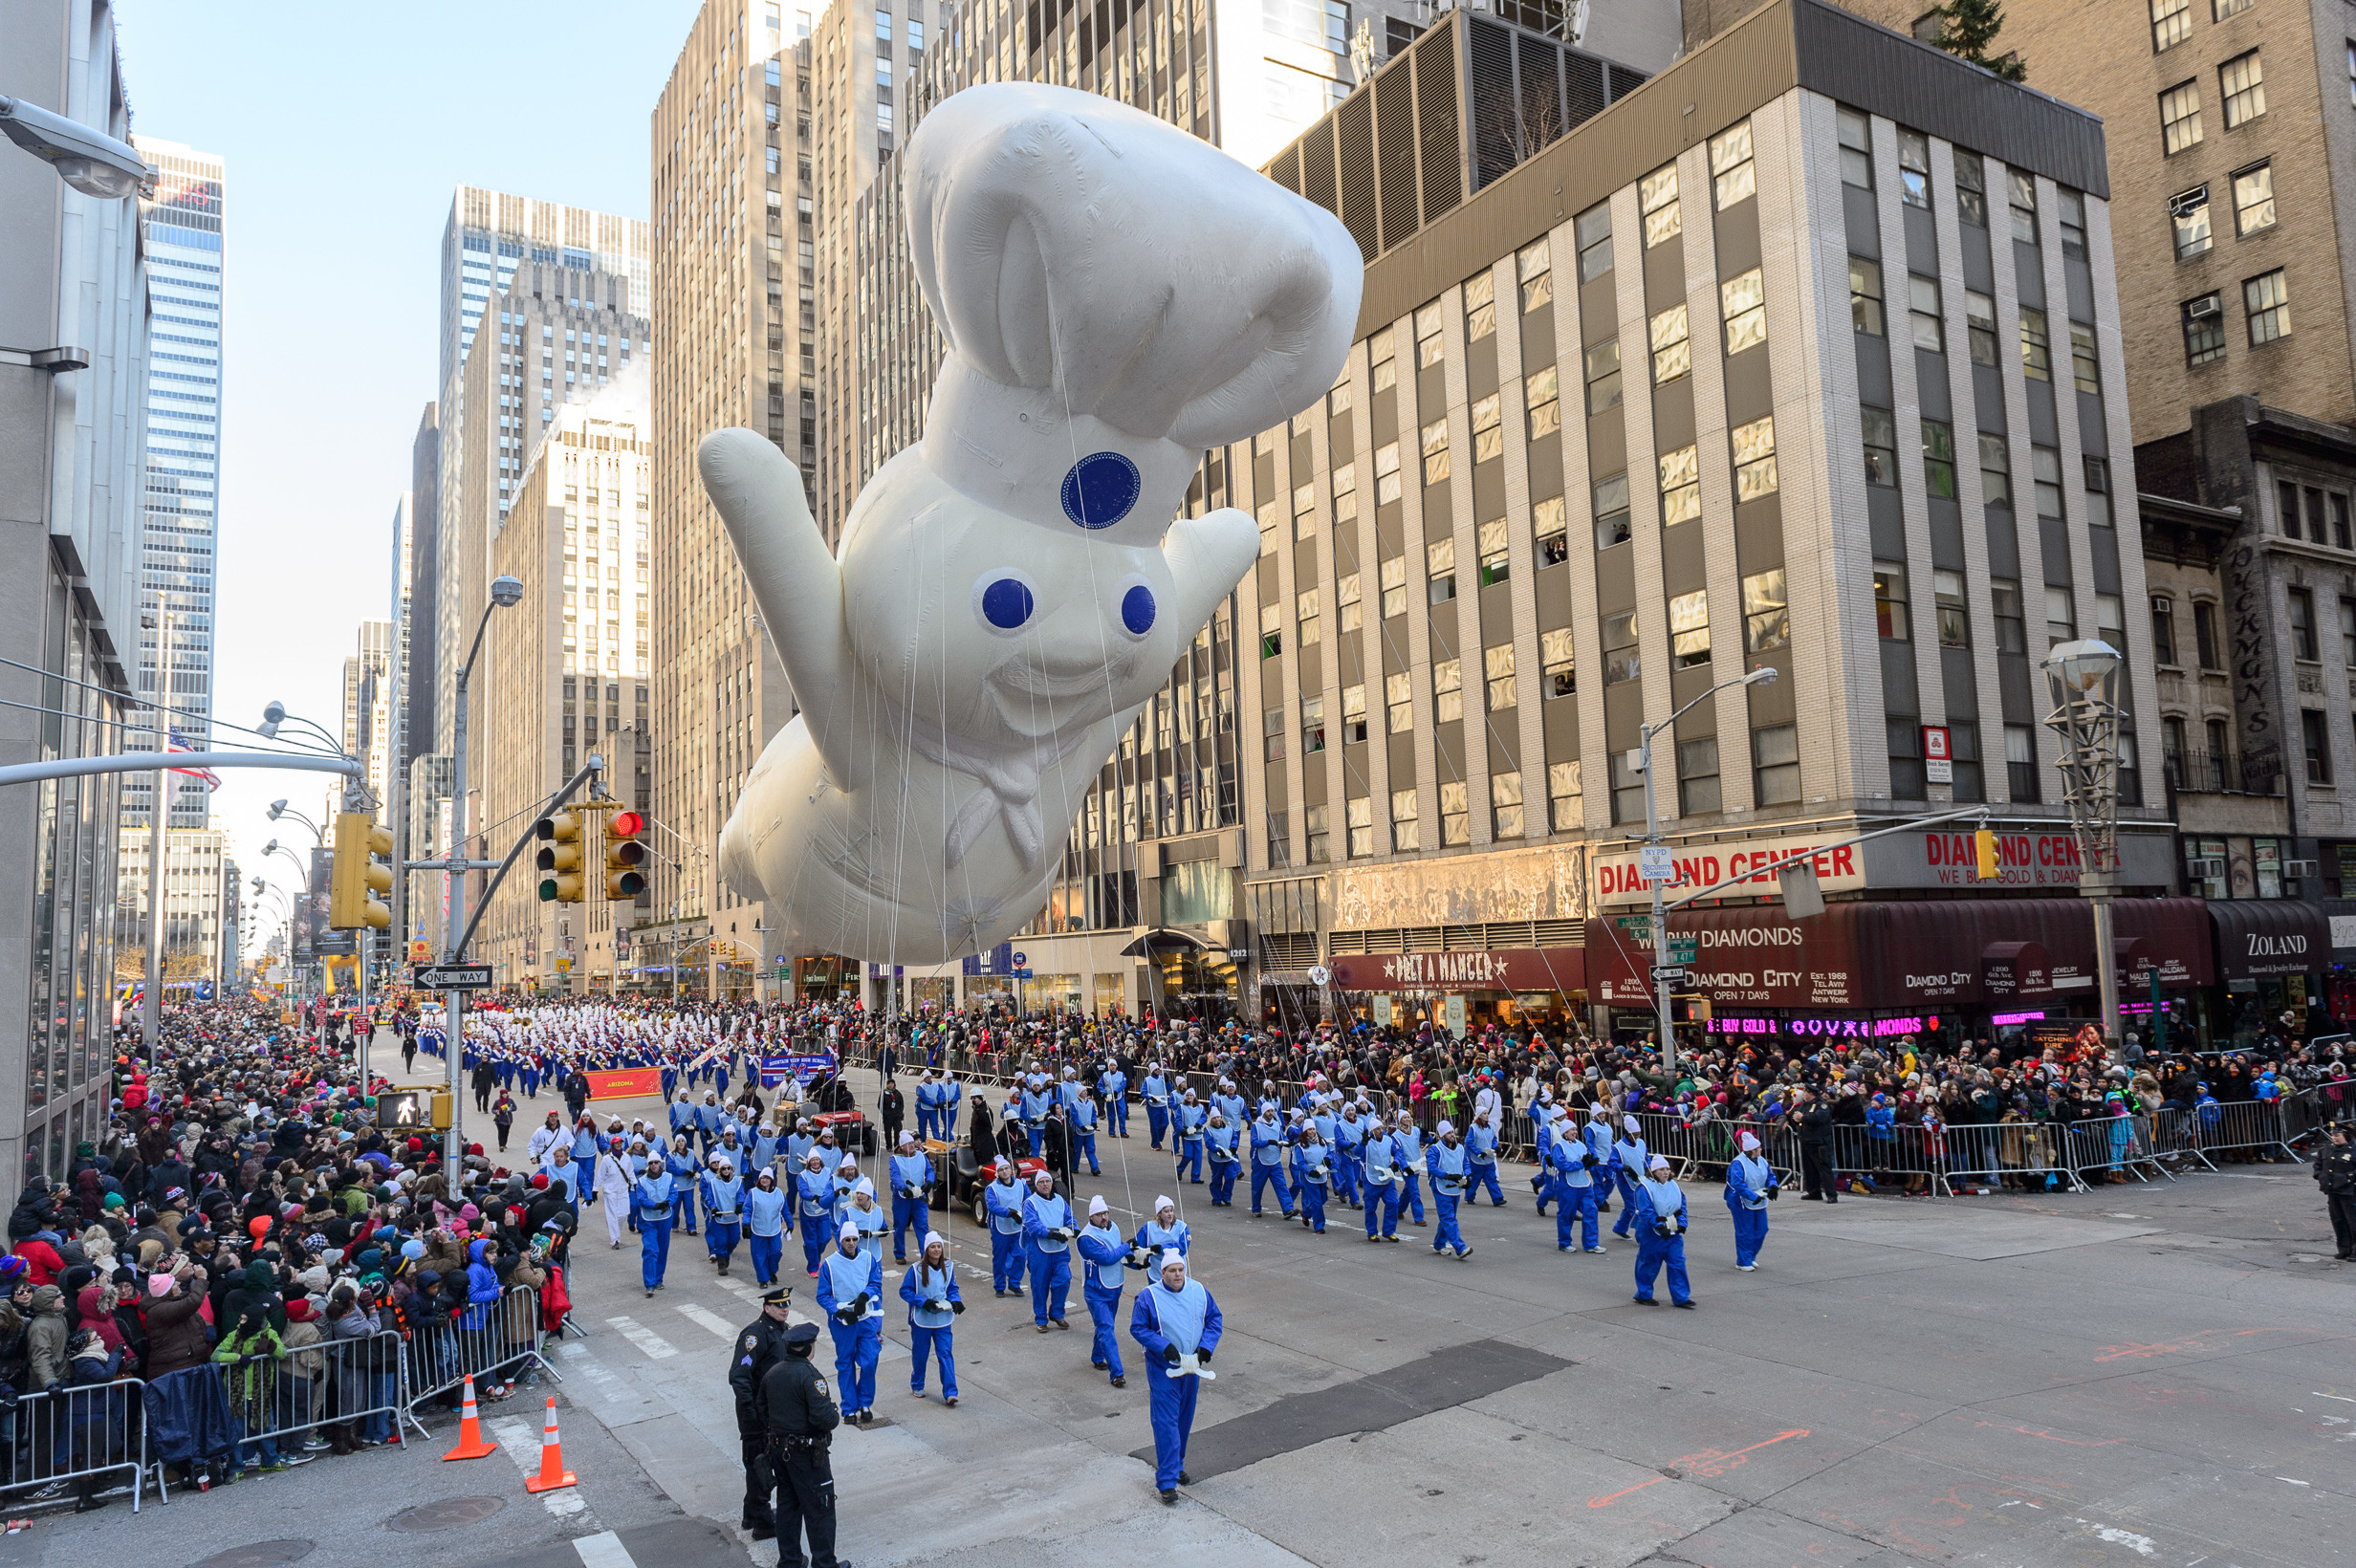 2464x1640 10 insider tips for this year's Macy's Thanksgiving Day Parade